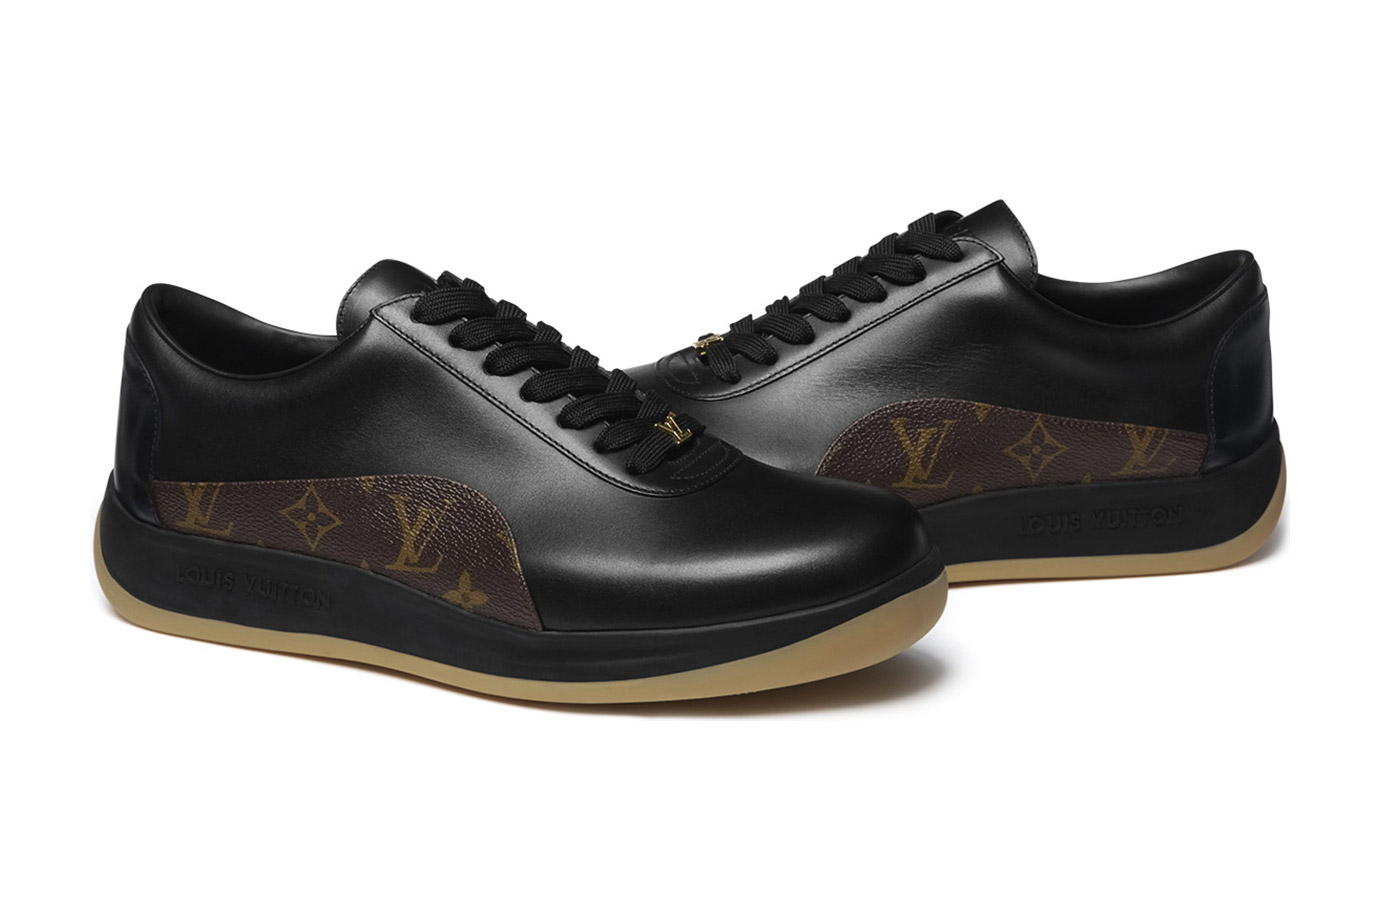 Louis Vuitton to Unveil Collaboration with Cult Brand Supreme – WWD